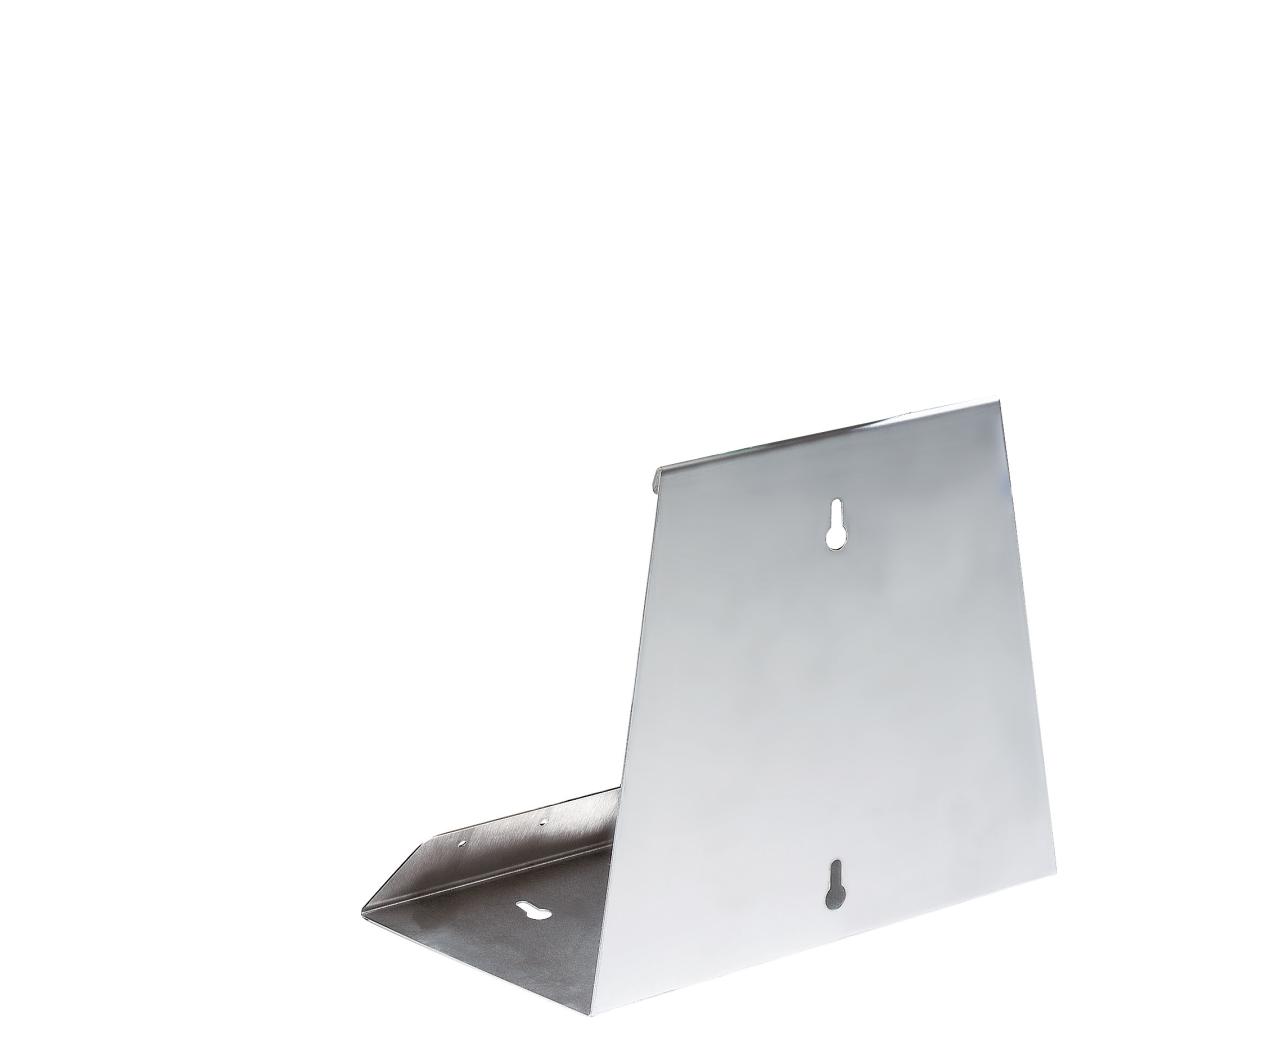 Tarifold Stainless Steel Desk Display System Base, A4, for 10 to 30 Pocket